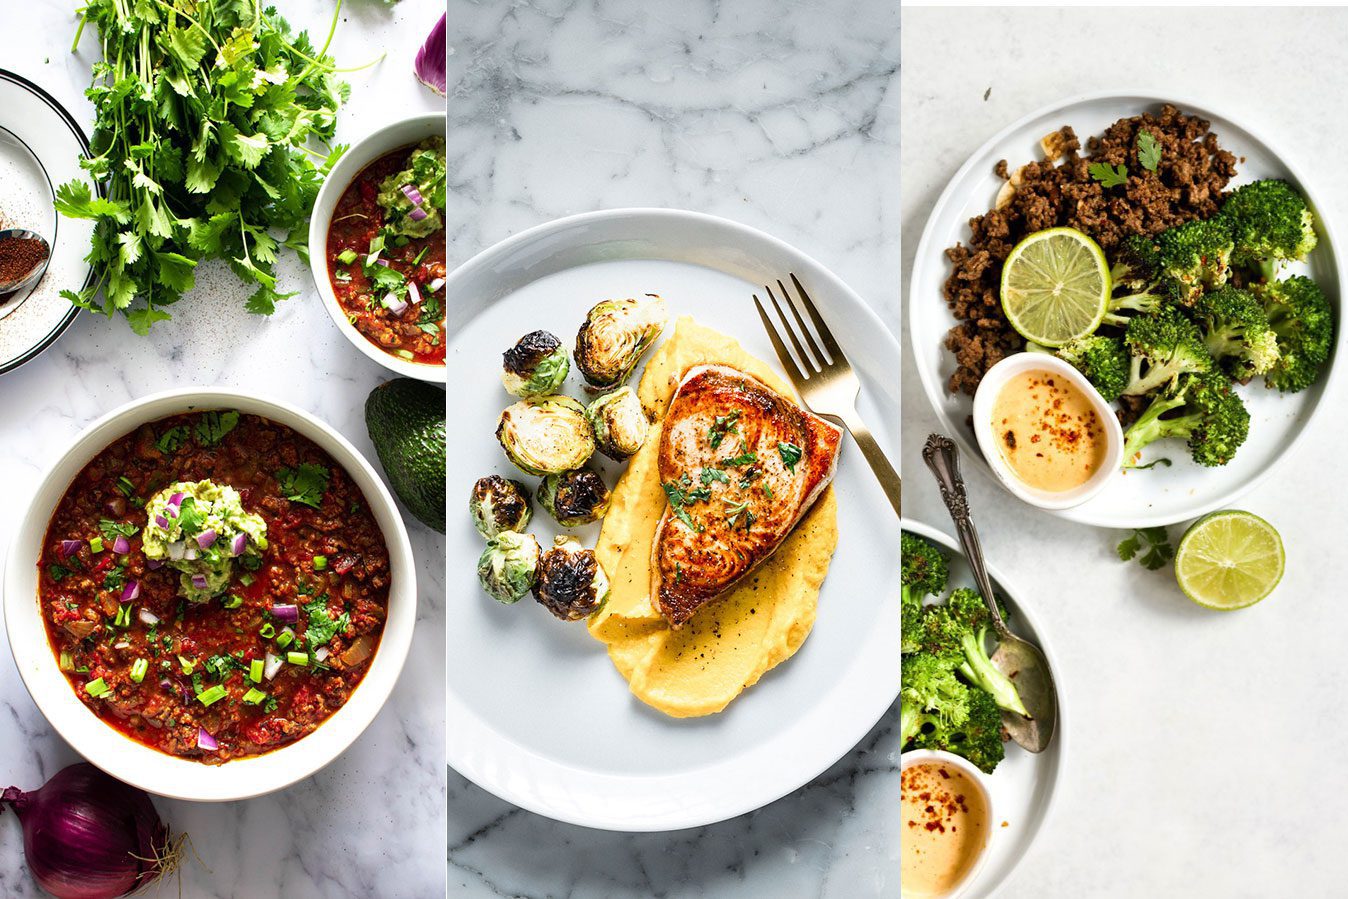 35 Easy Low Carb Paleo Dinners to Make at Home